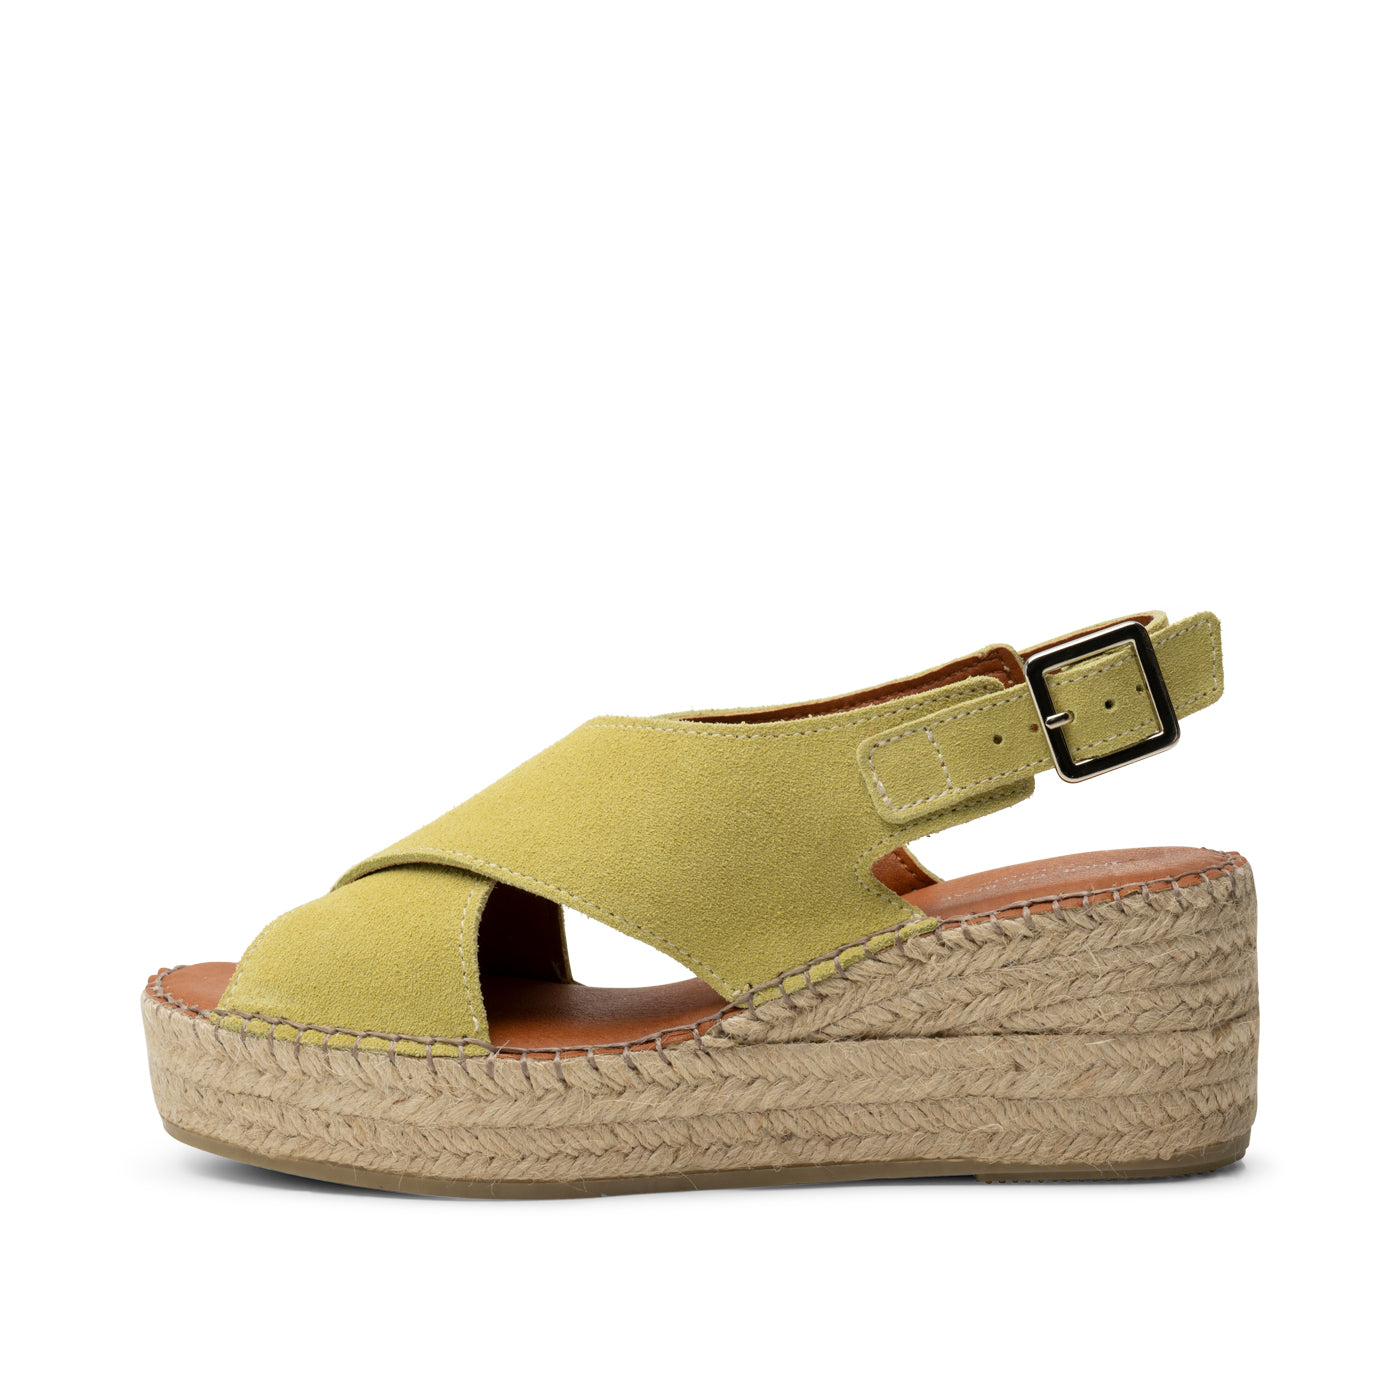 SHOE THE BEAR WOMENS Orchid wedge suede Espadrilles 914 BUTTER